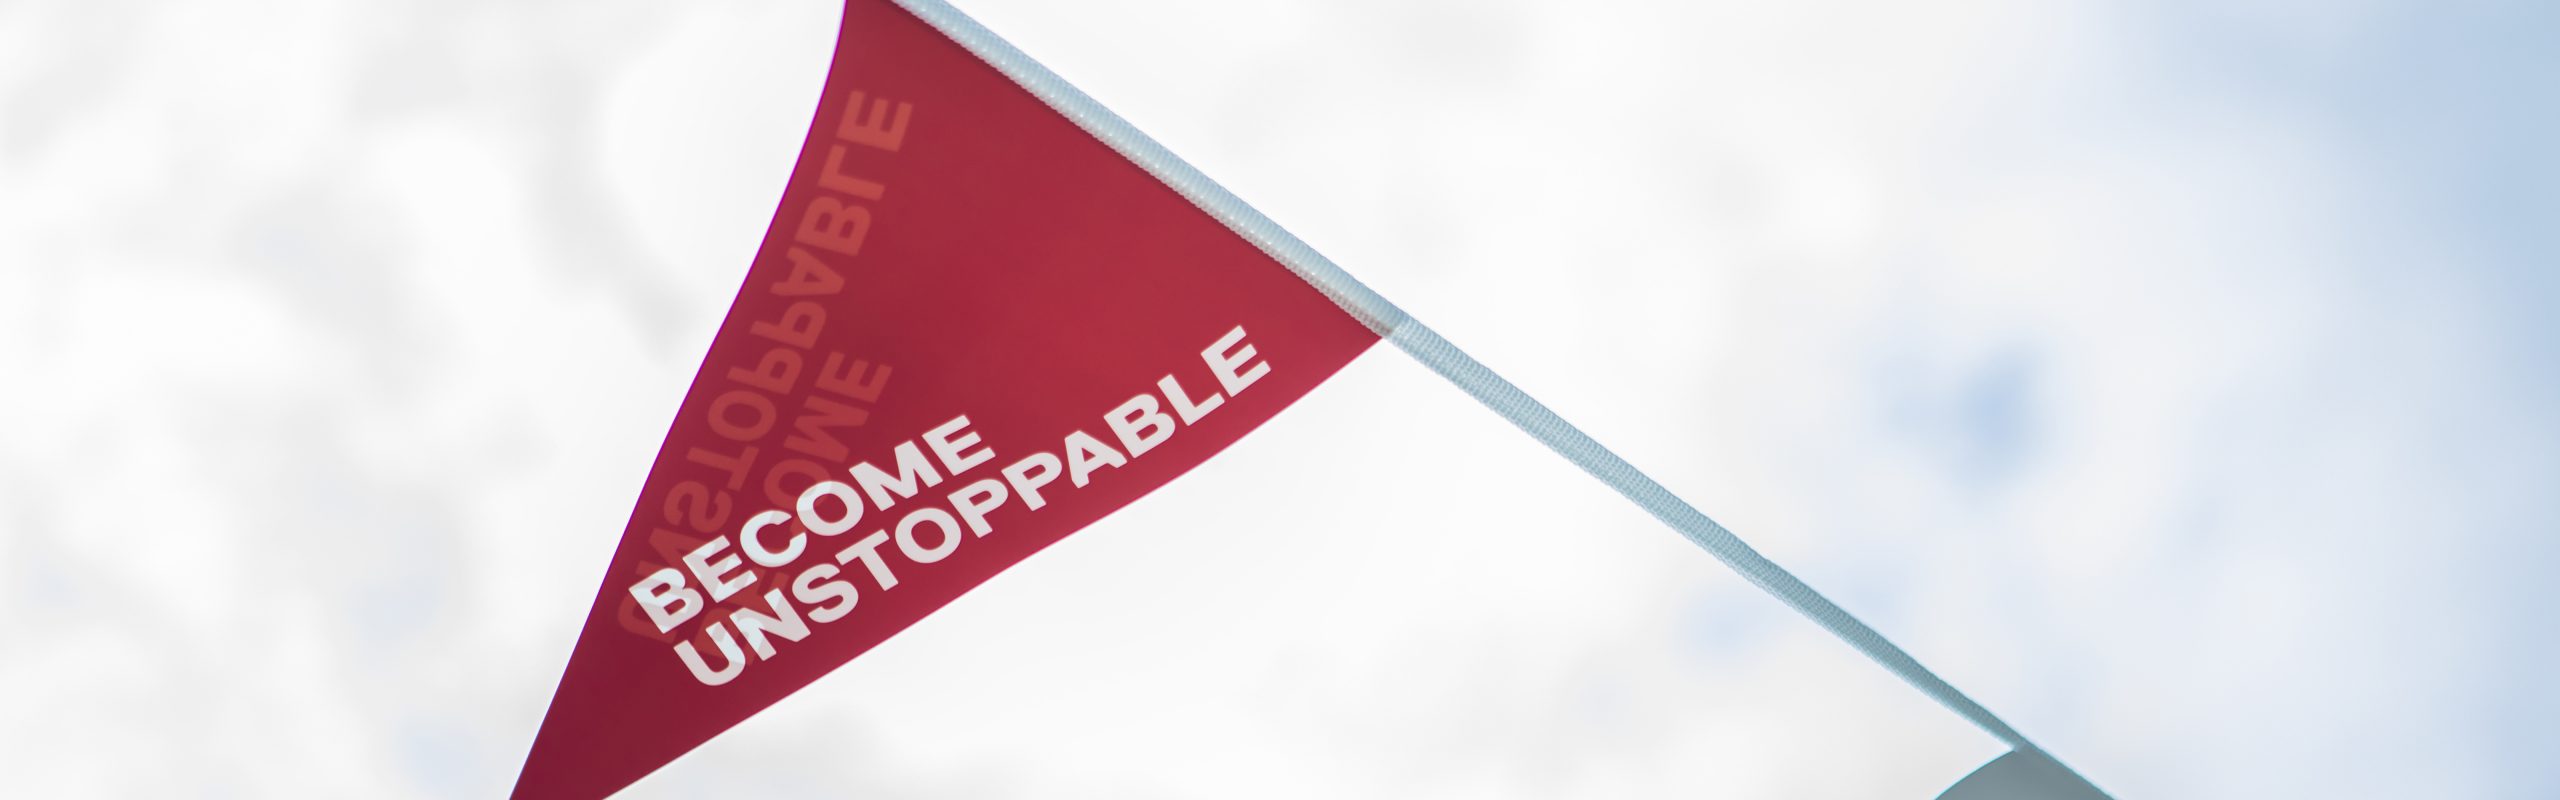 Become Unstoppable written on a red flag blowing in the wind